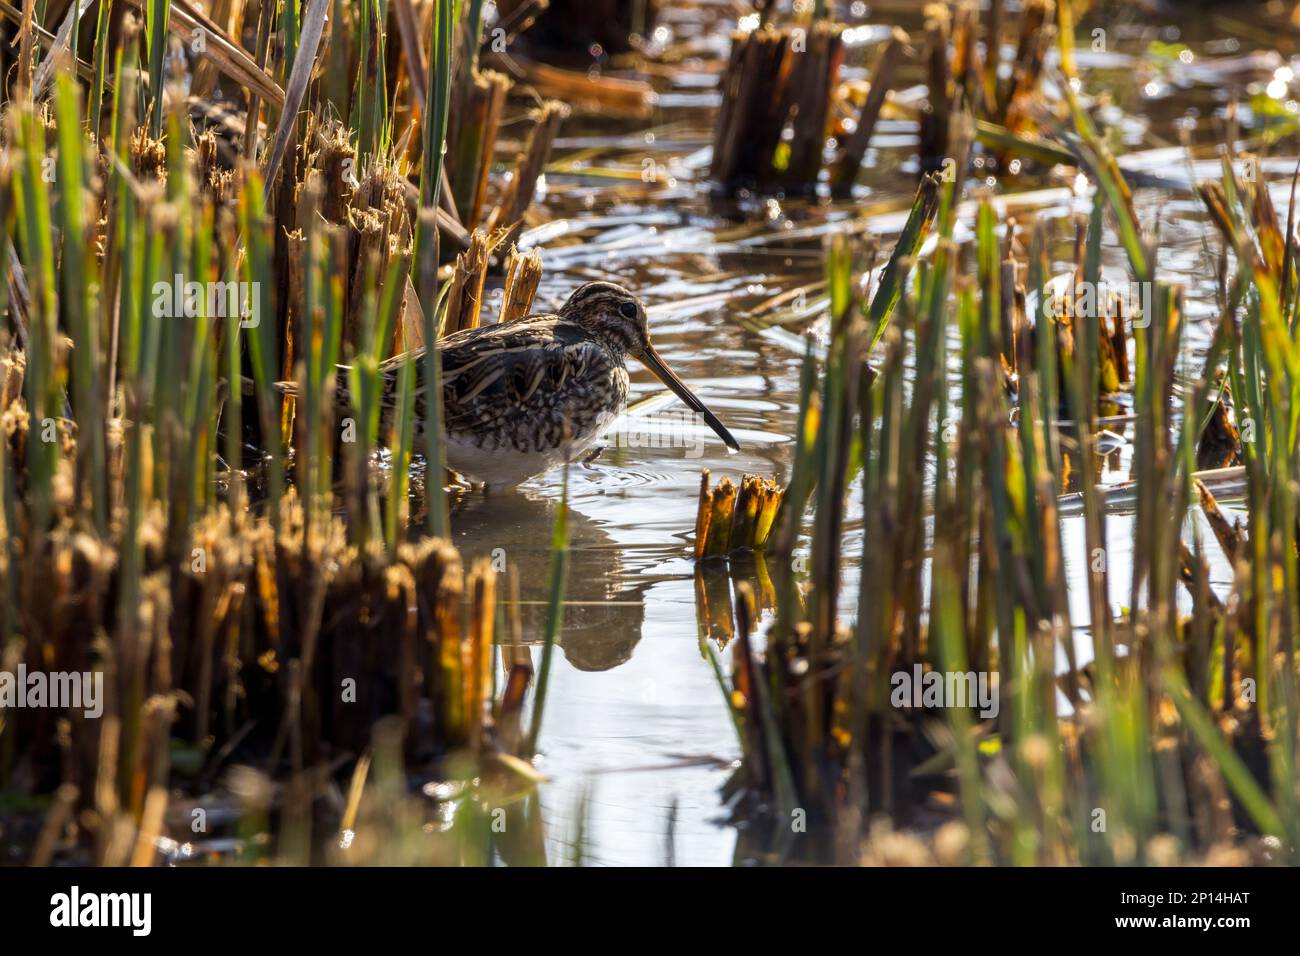 Snipe Gallinago x2, in cut reeds long strait bill dumpy body short legs eyes high on head buffish brown streaky plumage with black and white markings Stock Photo